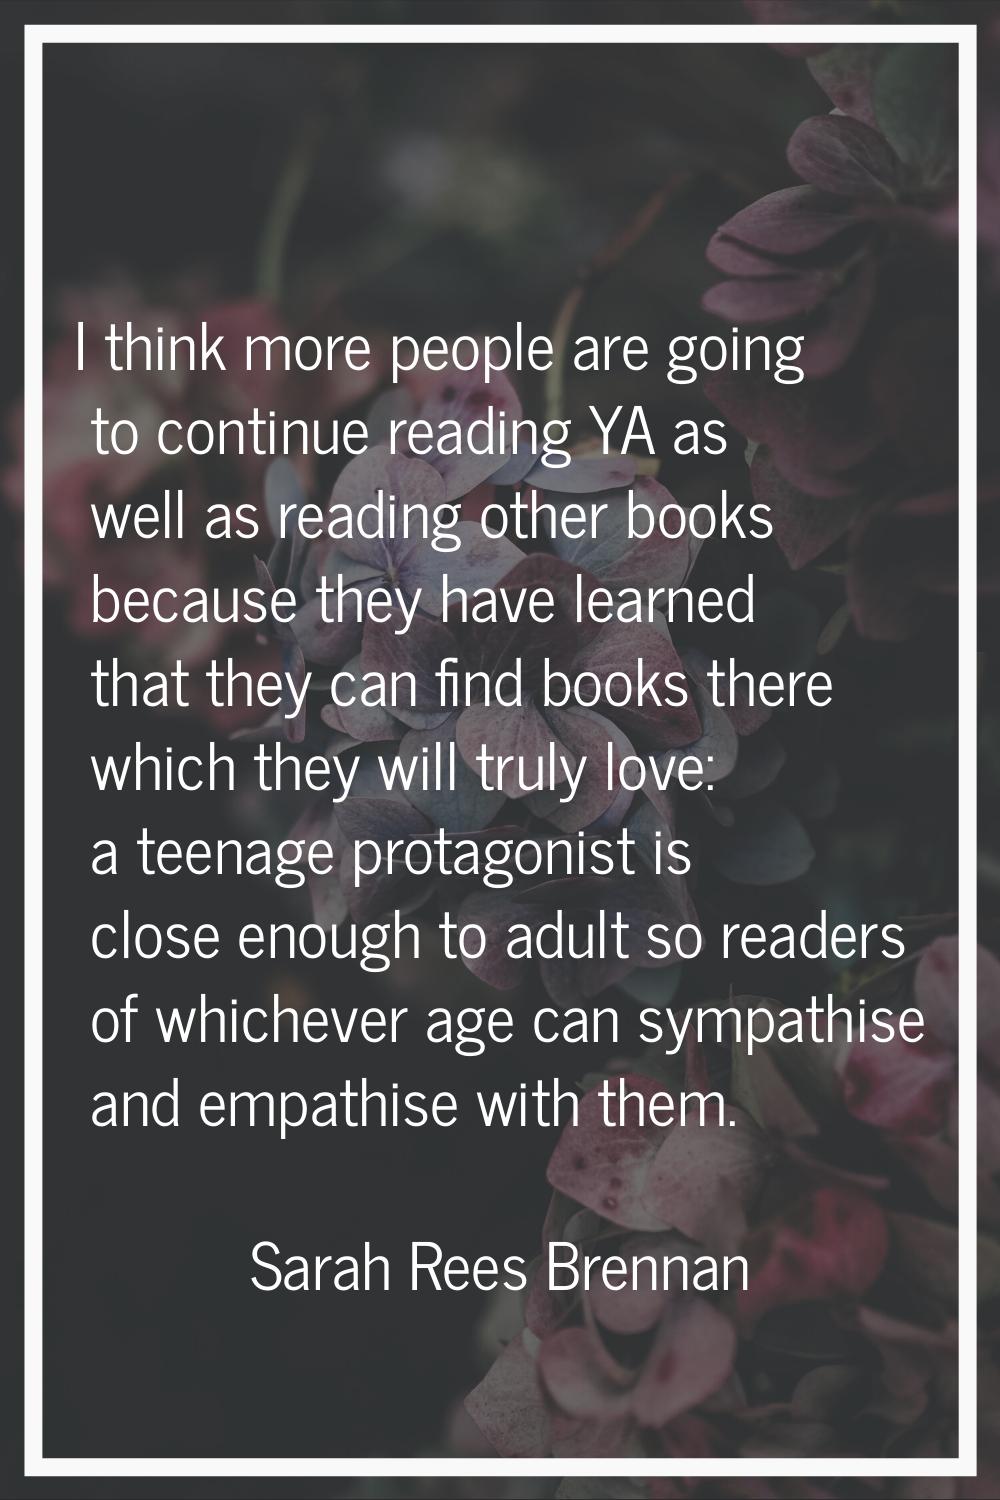 I think more people are going to continue reading YA as well as reading other books because they ha